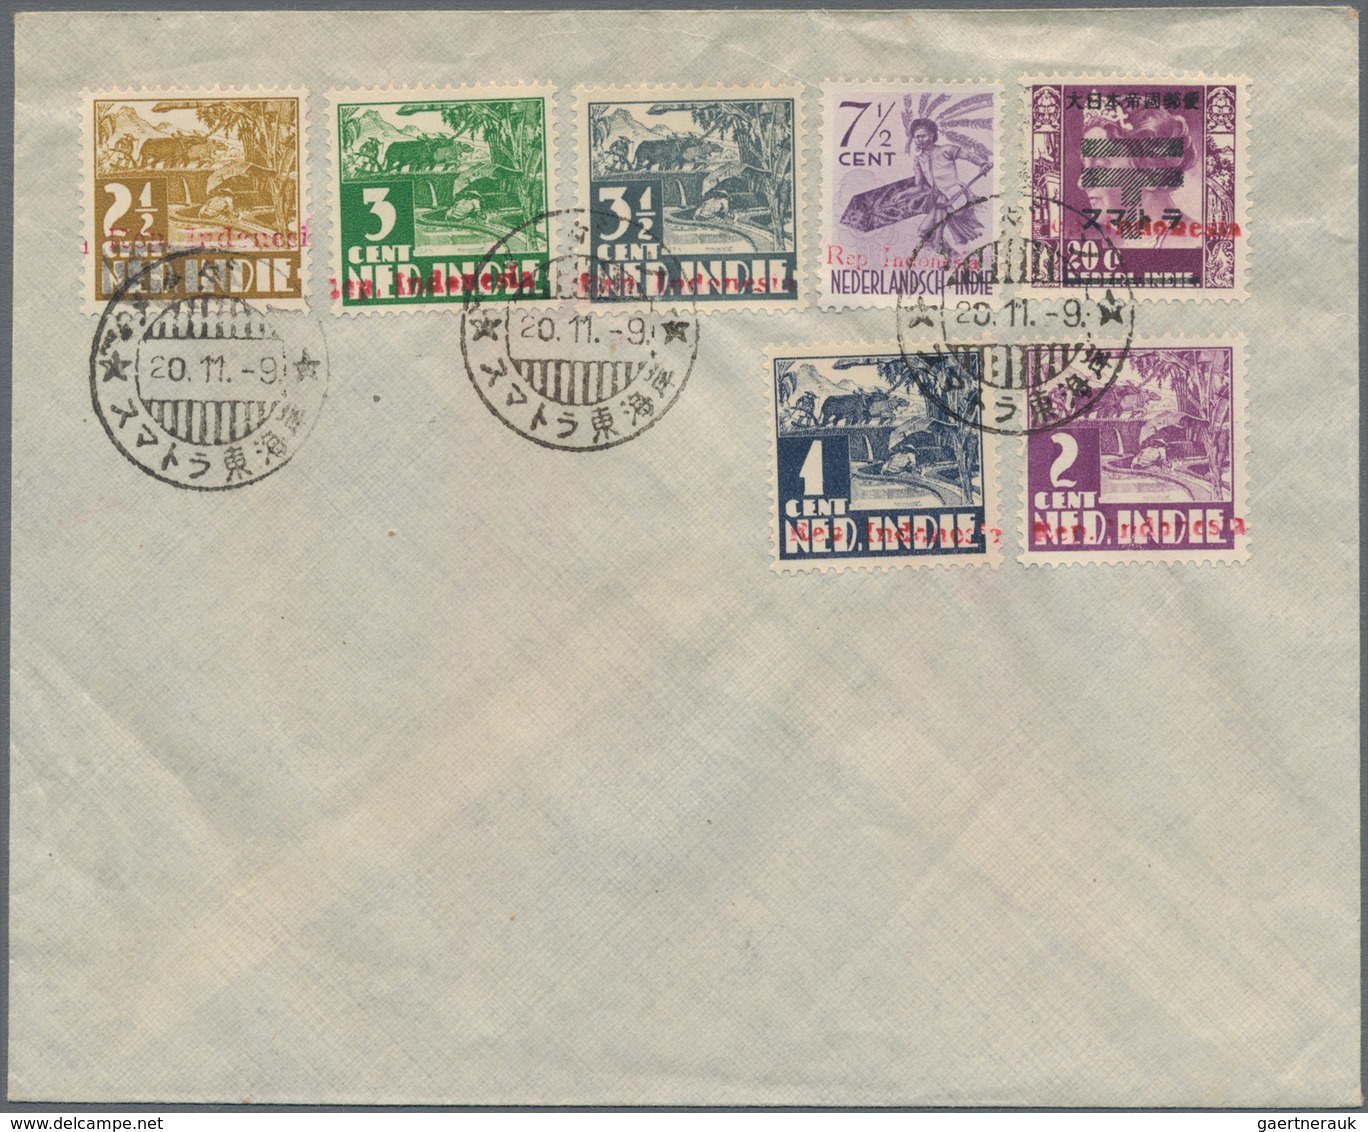 Indonesien: 1946, red ovpt. "Rep. Indonesia" on DEI issues 1 C./7 ½ C. and jap. occupation Sumatra 2